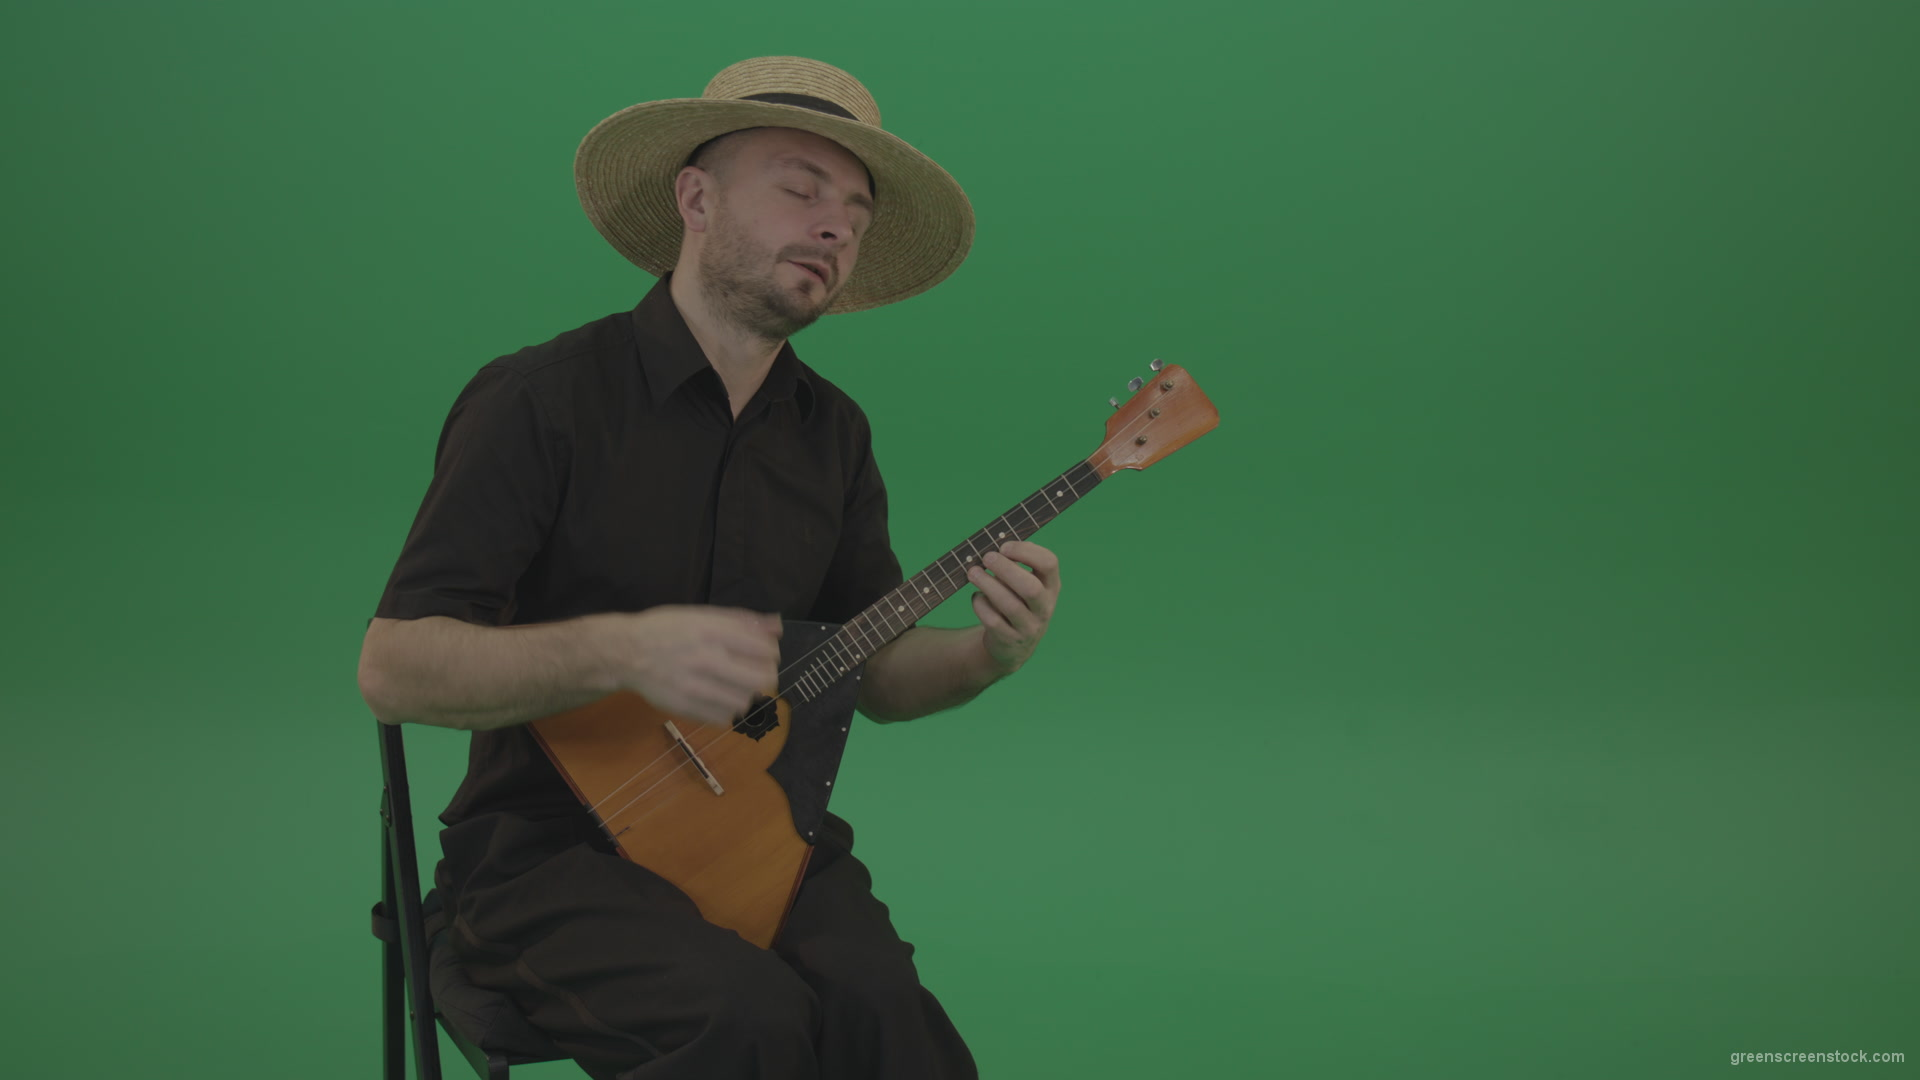 Man-from-village-play-Balalaika-music-instrument-isolated-on-green-screen_001 Green Screen Stock